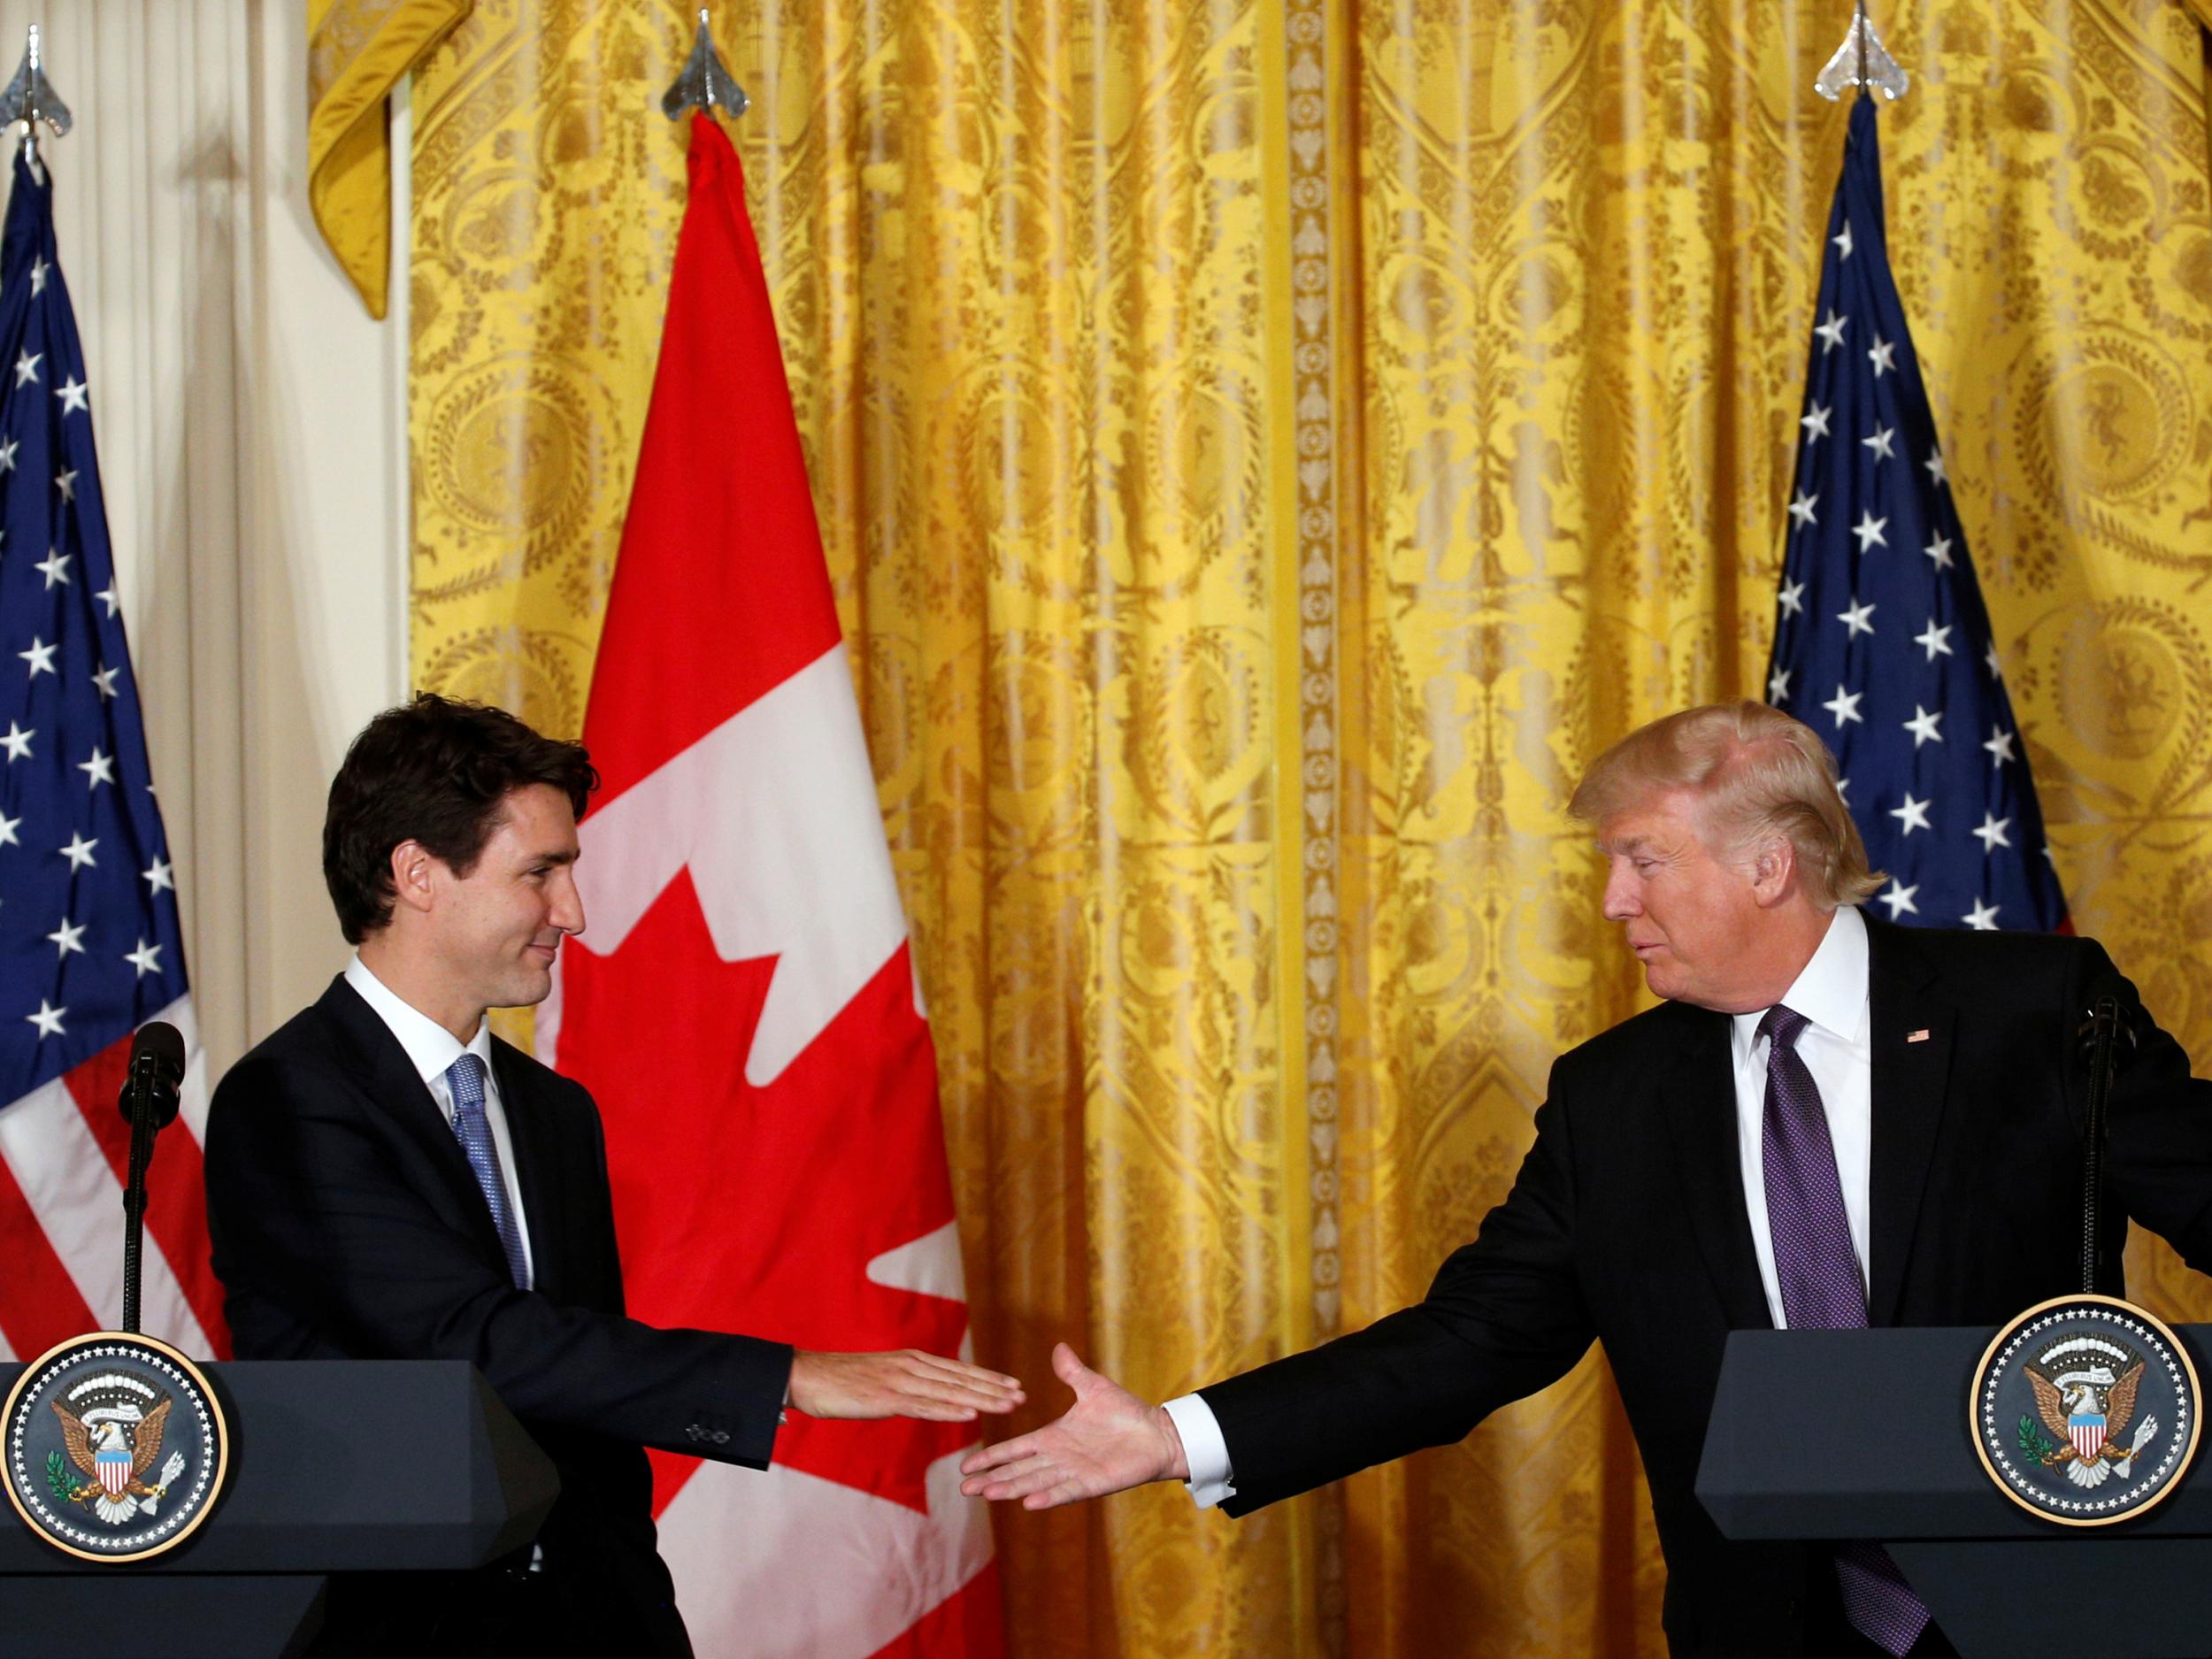 President Trump hosting Canadian Prime Minister Justin Trudeau at the White House in February